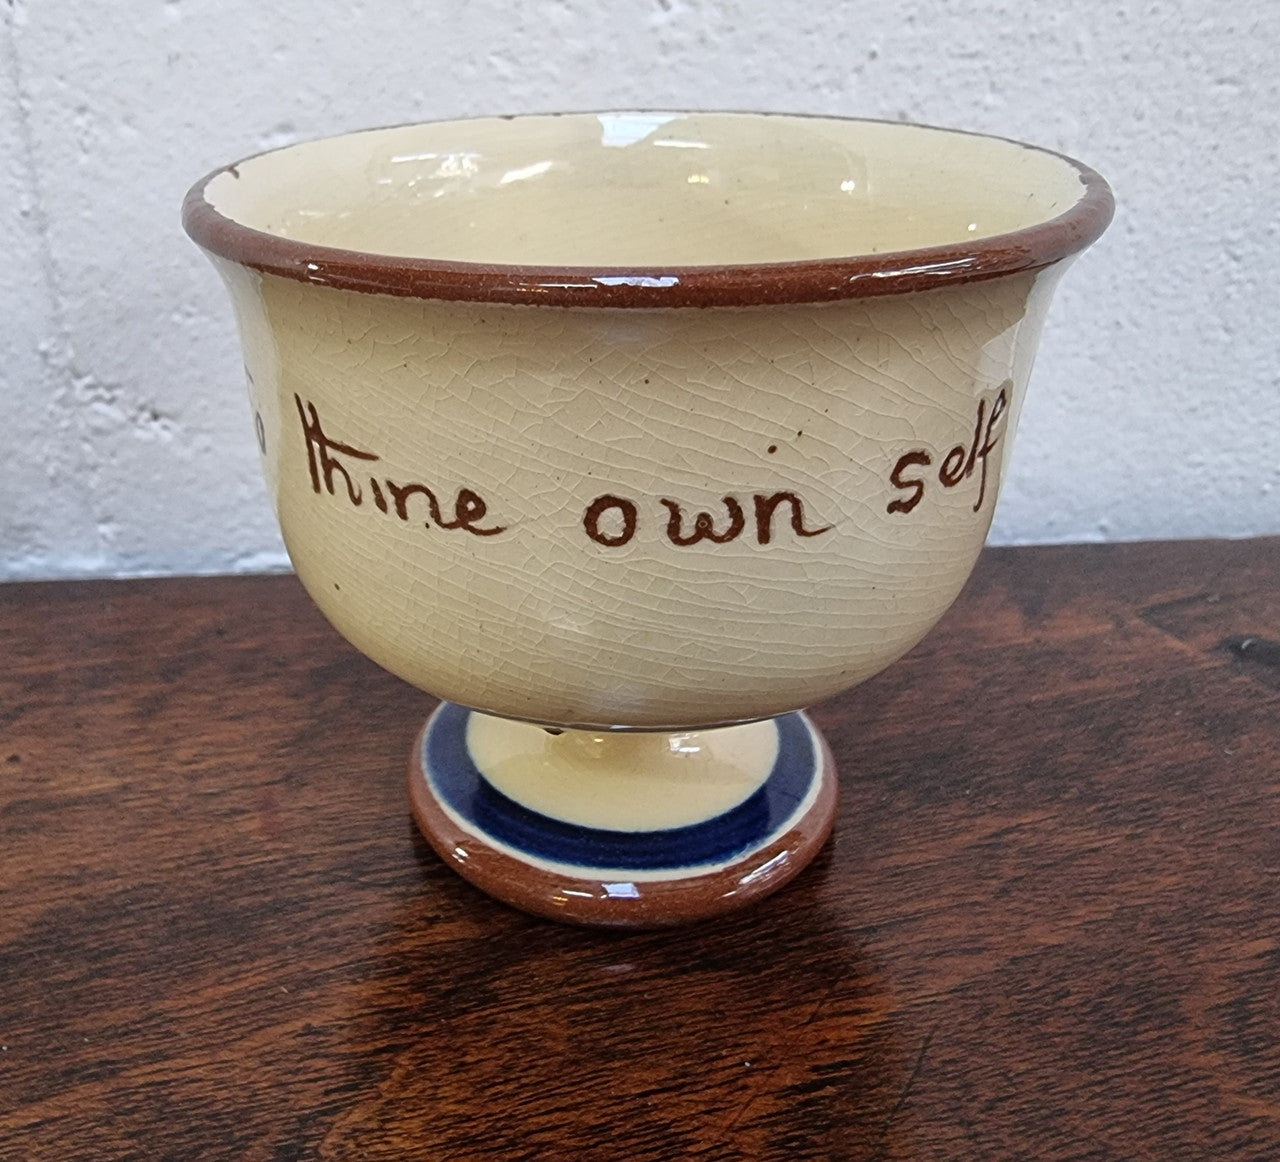 Torquay Ware Hand-Painted Bowl “To thine own self be true”